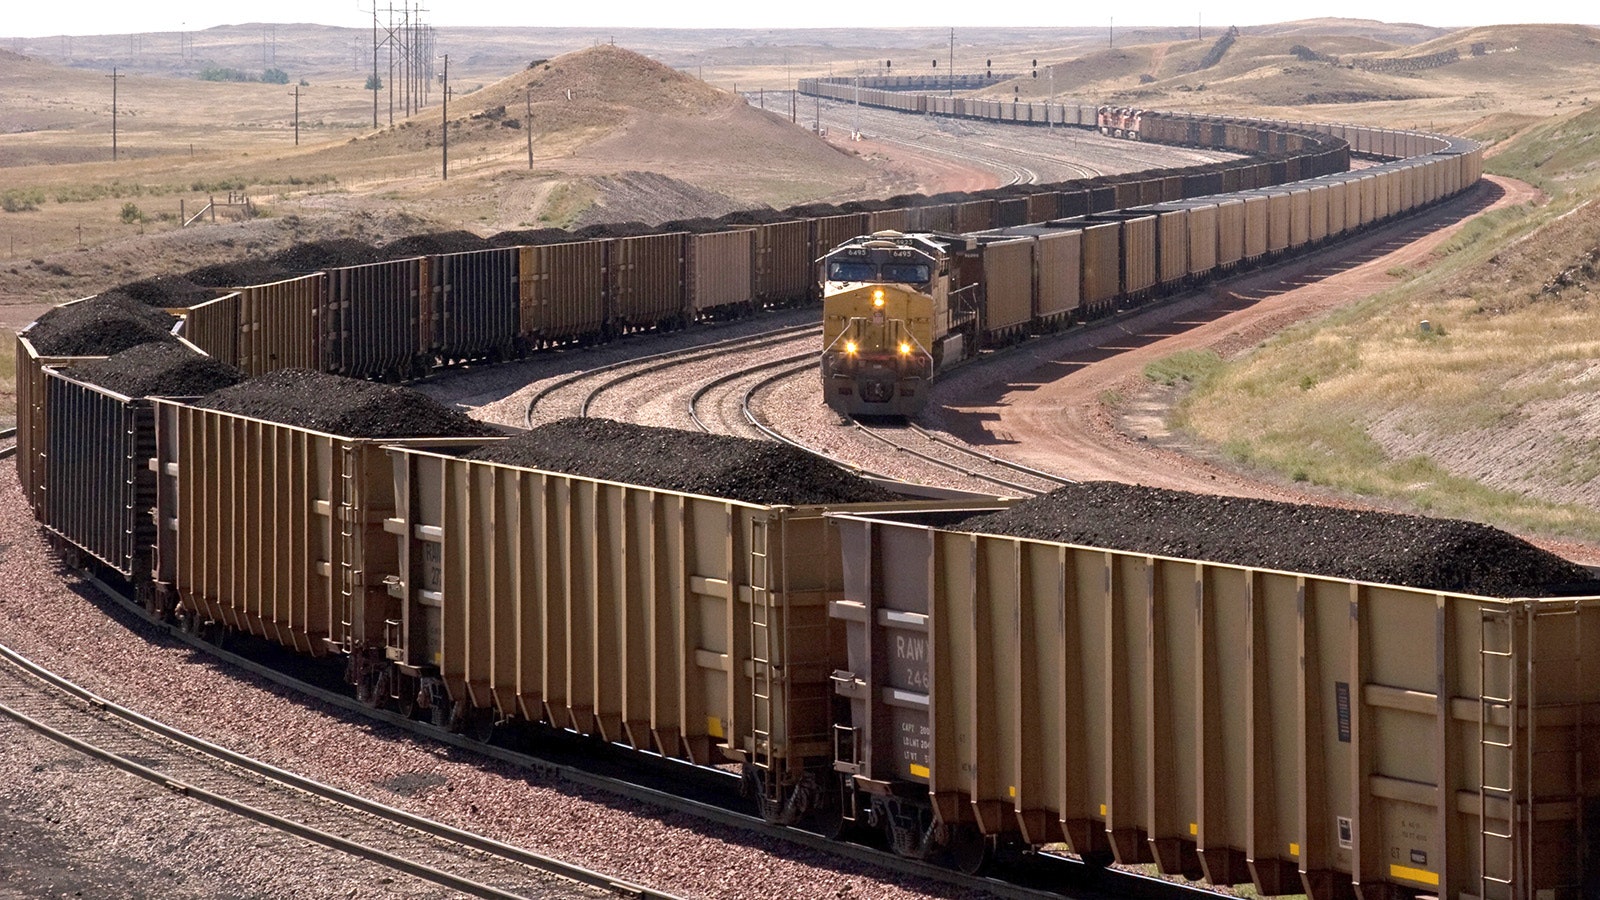 Long coal trains pull in and out of the North Antelope Rochelle mine in Campbell County, Wyoming.